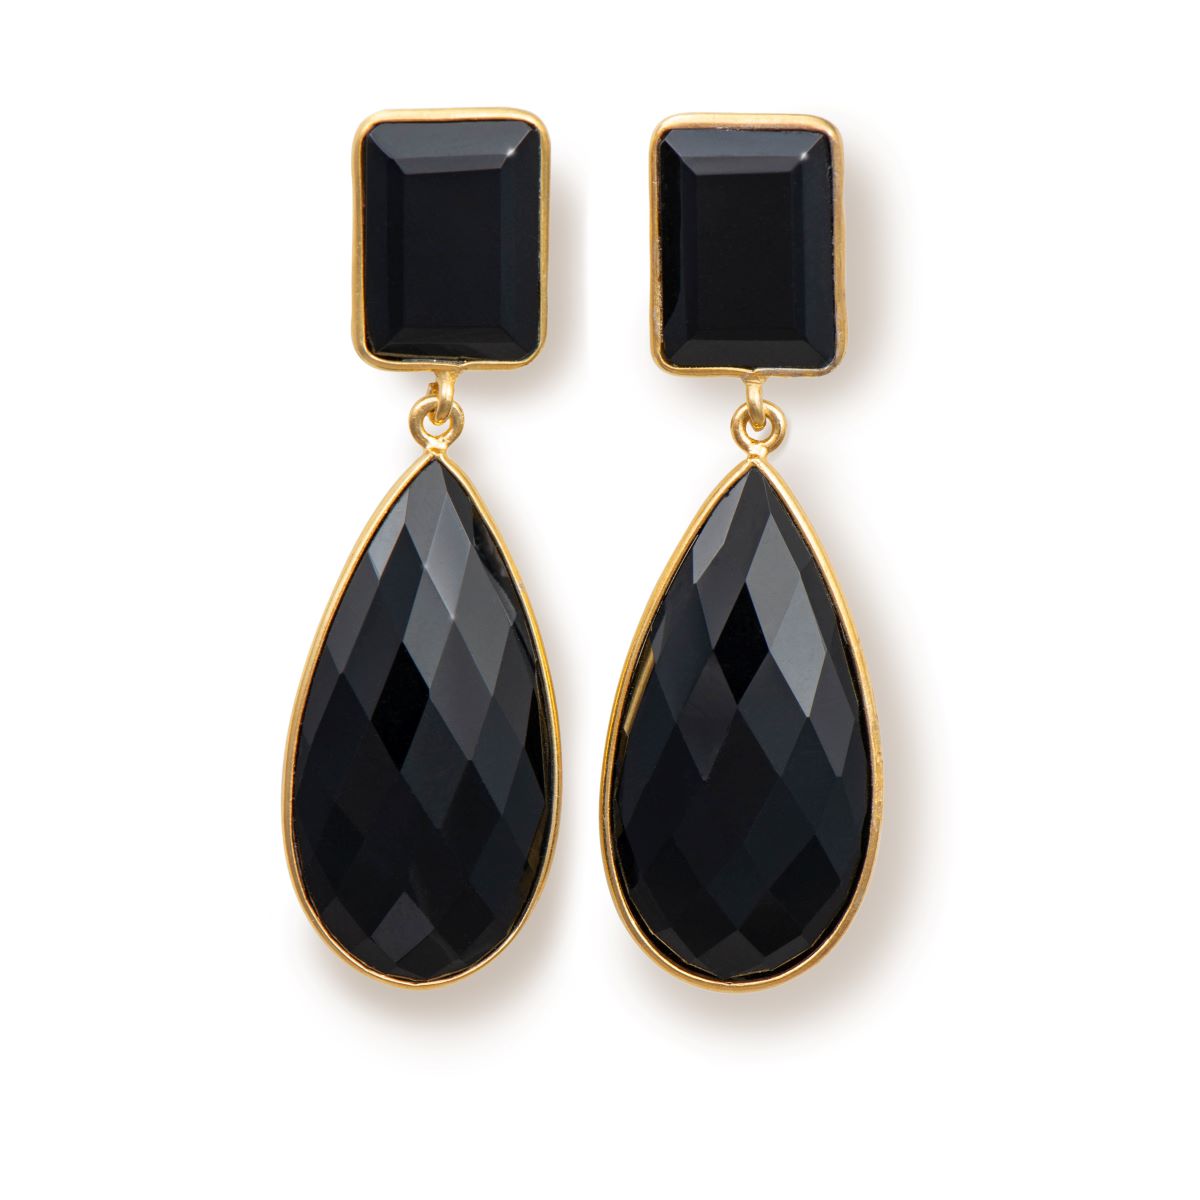 Long Statement Earrings with a Rectangle Stone and Long Pear Shaped Stone Drop  - Black Onyx